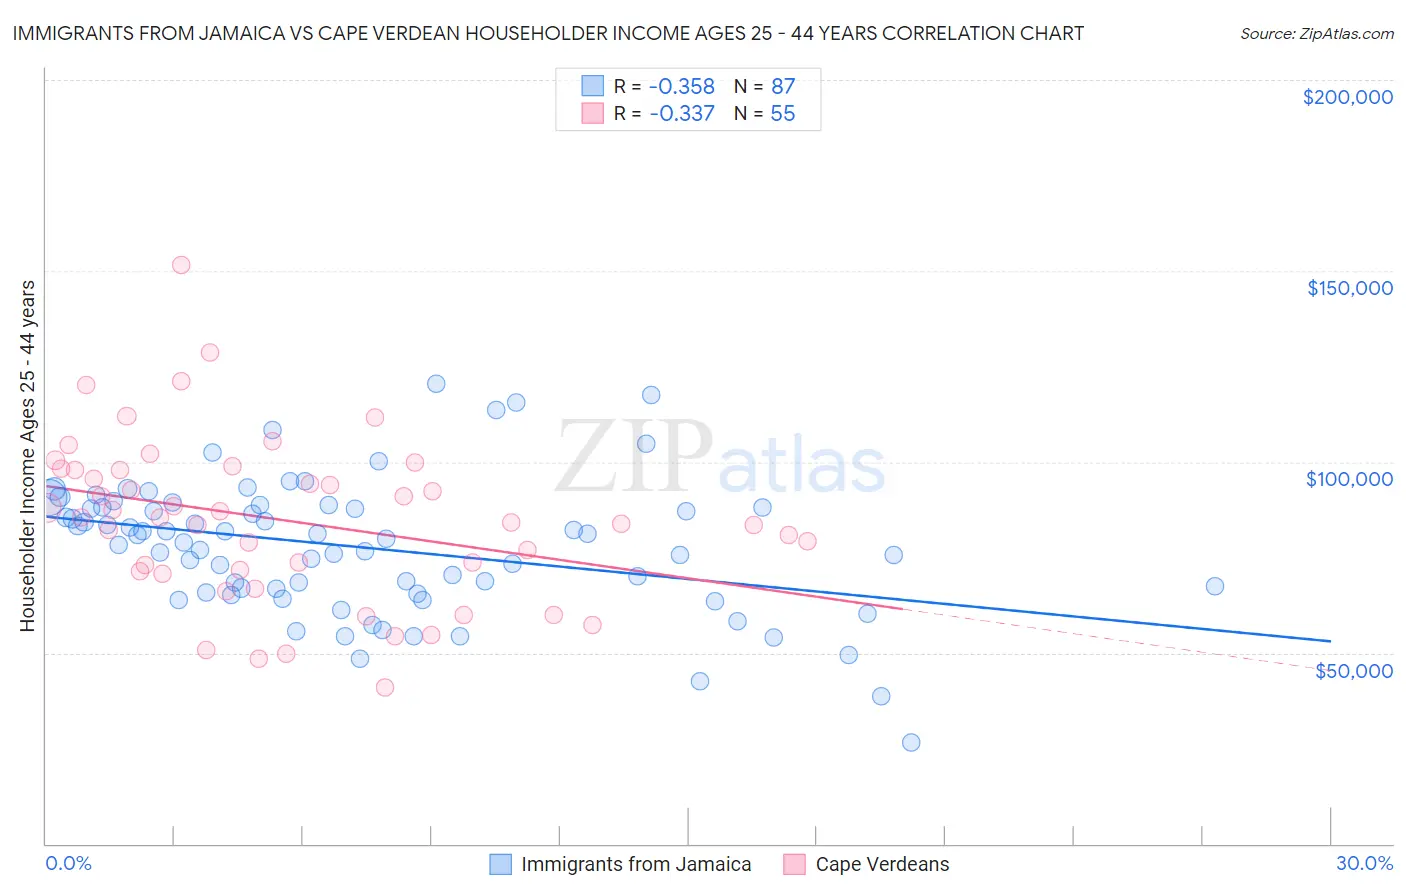 Immigrants from Jamaica vs Cape Verdean Householder Income Ages 25 - 44 years